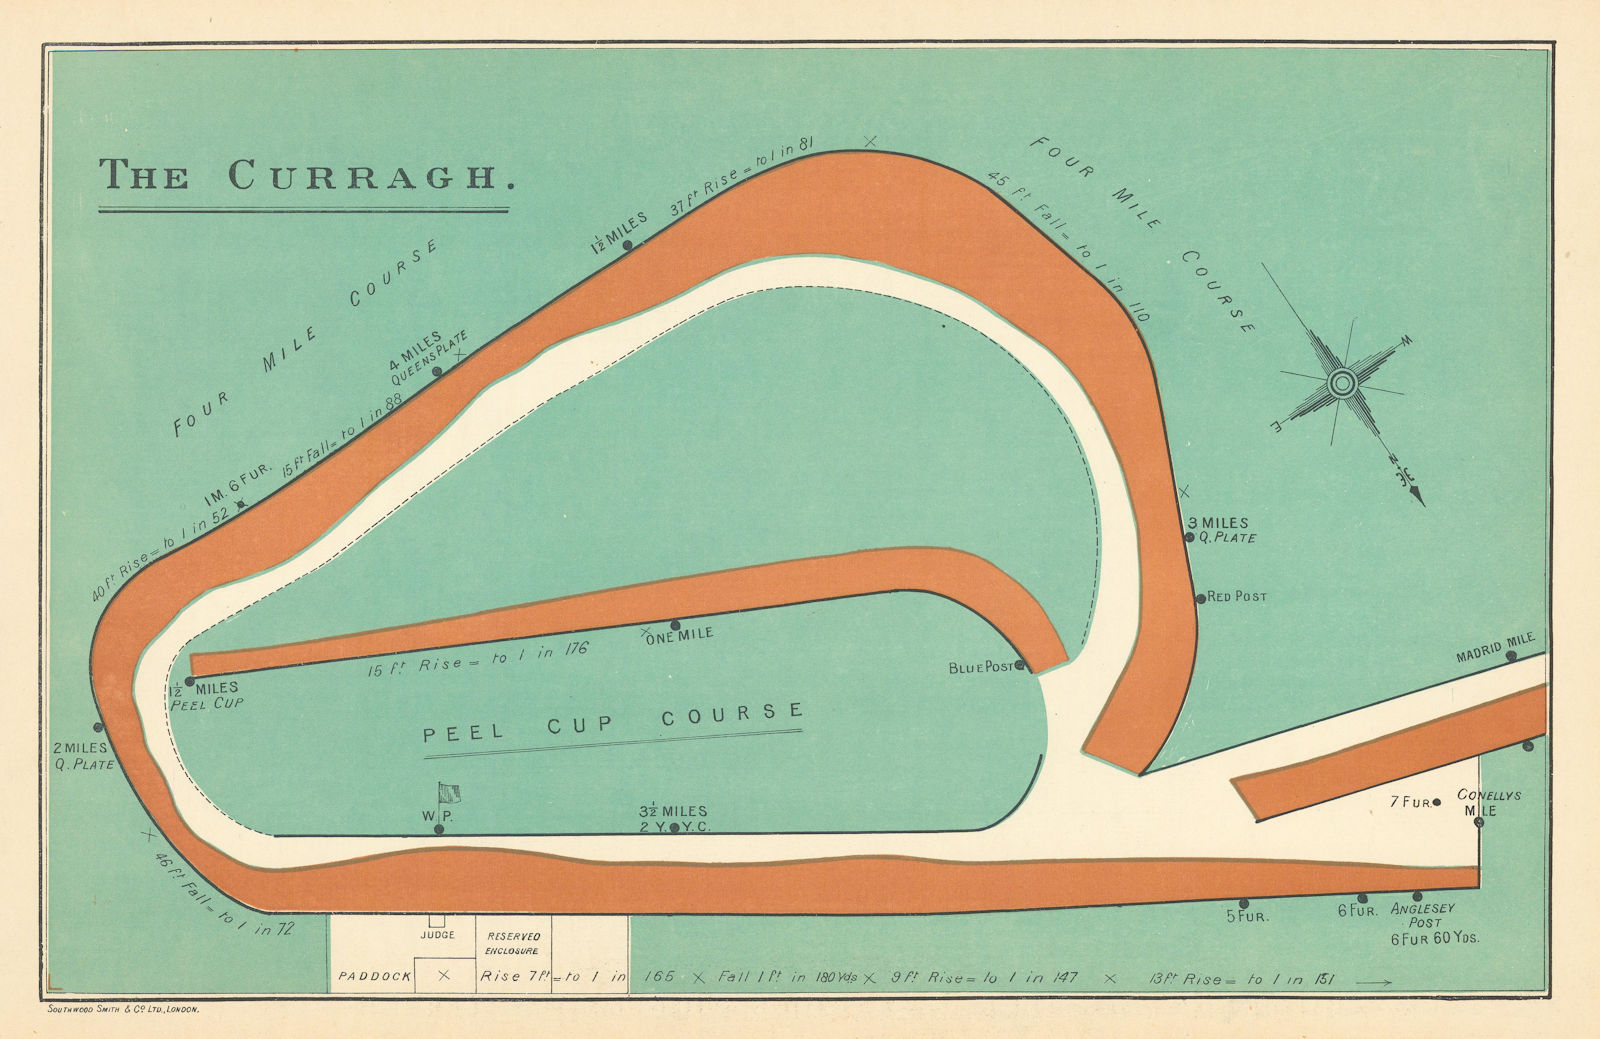 Associate Product The Curragh racecourse, Ireland. Peel Cup course. BAYLES 1903 old antique map